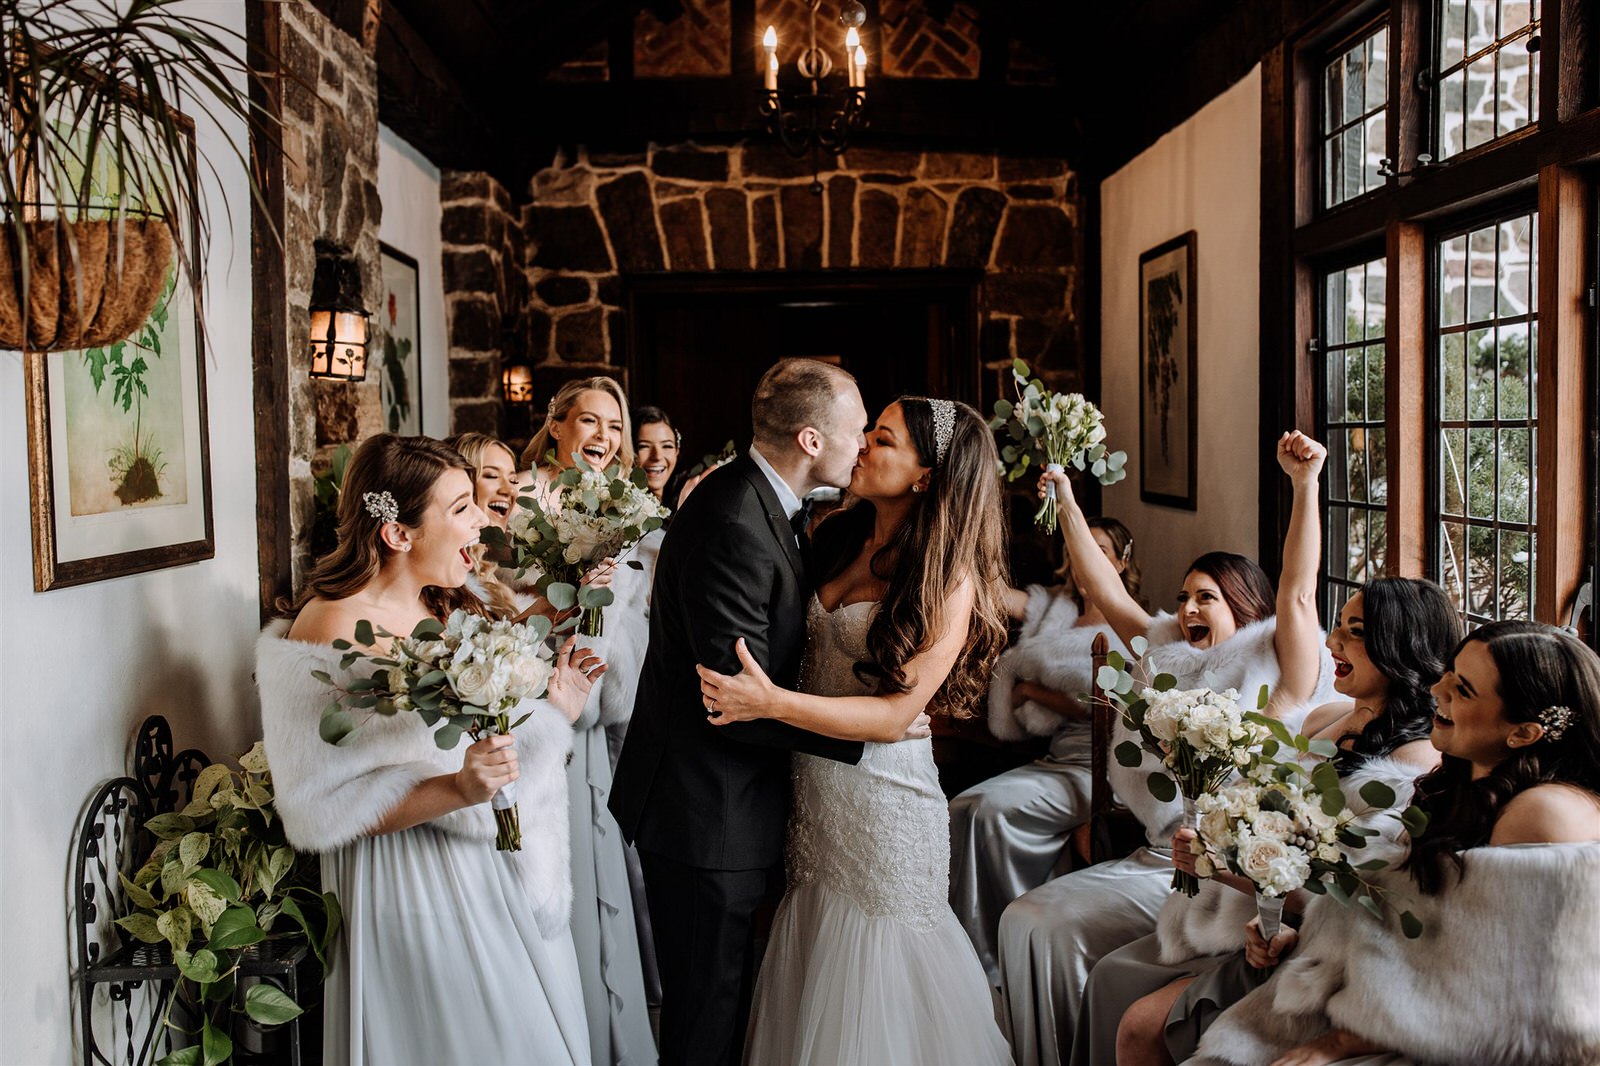 Bride and groom kissing with bridal party around them and cheering